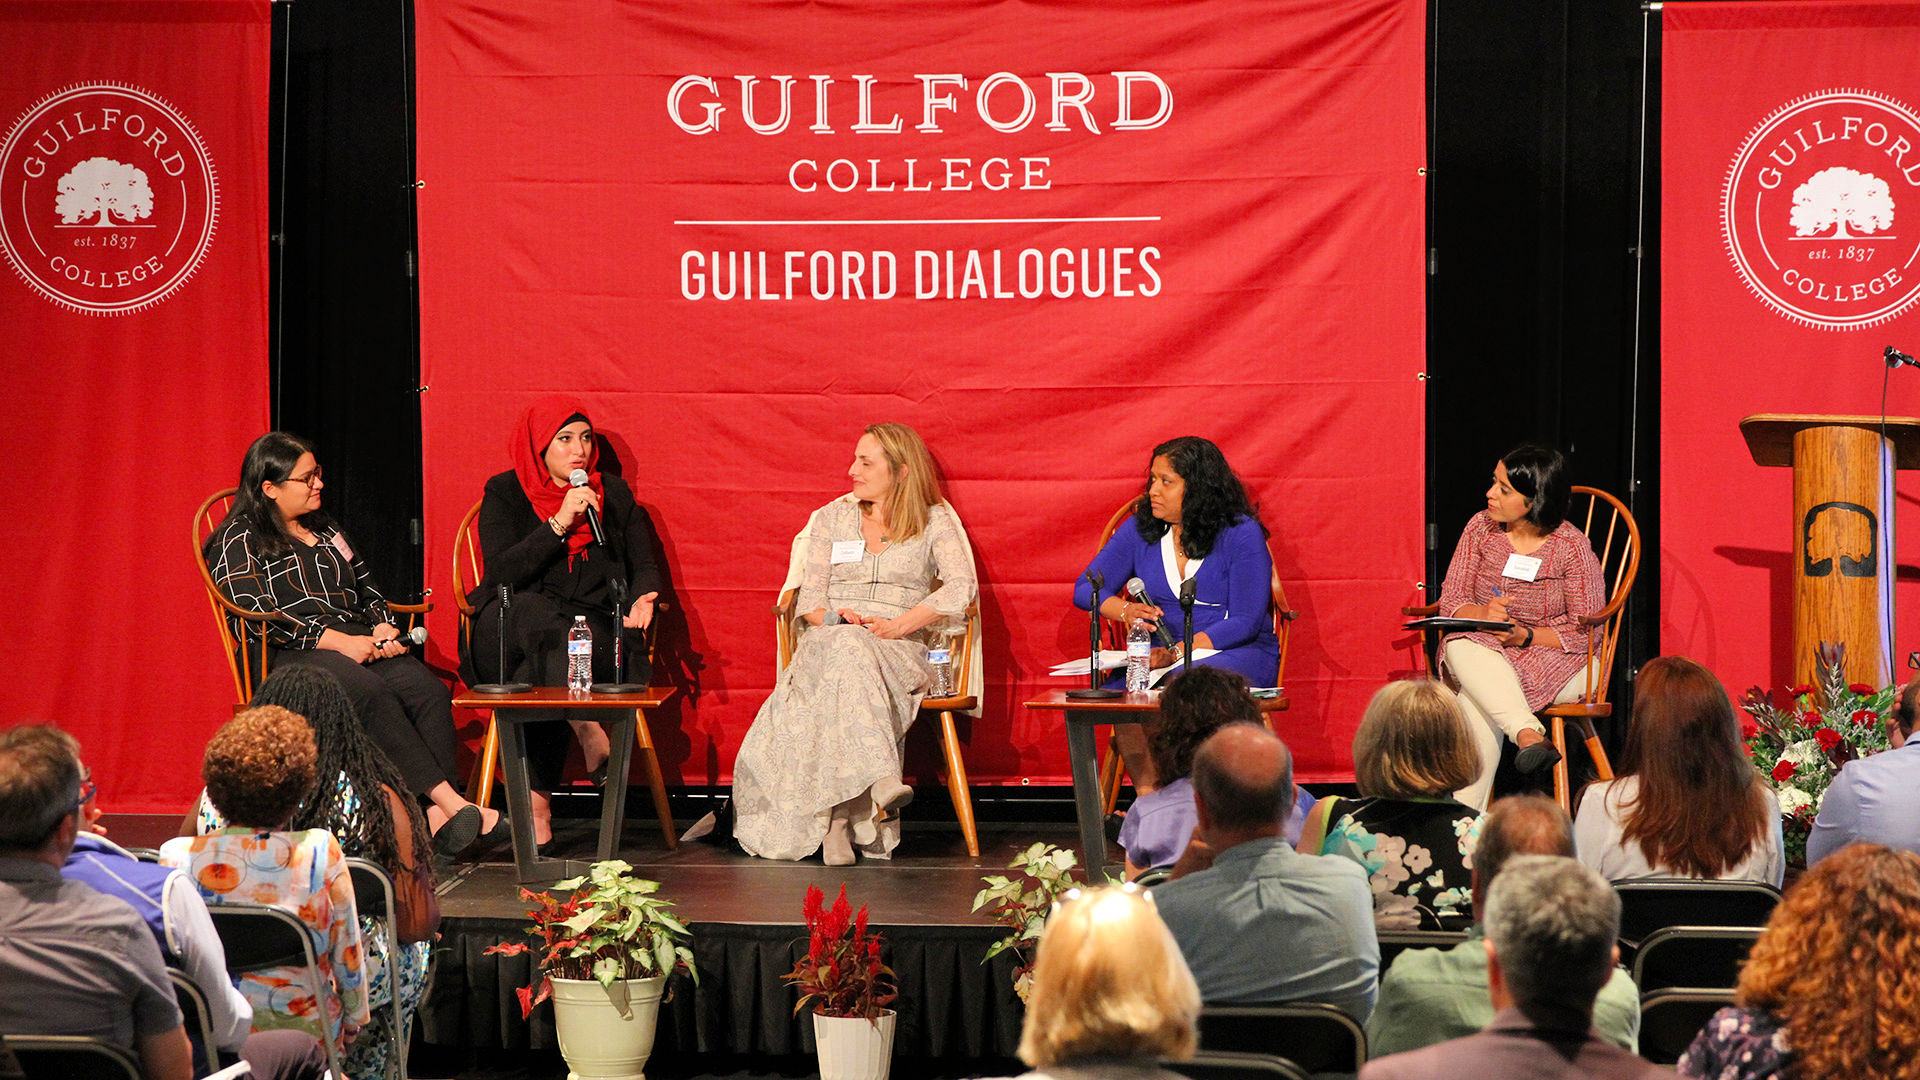 Seated on stage at the Guilford Dialogues are, from left: Maria Gonzalez, Hourie Tafech, Colleen Thouez, Esther Benjamin, and Sonalini Sapra.